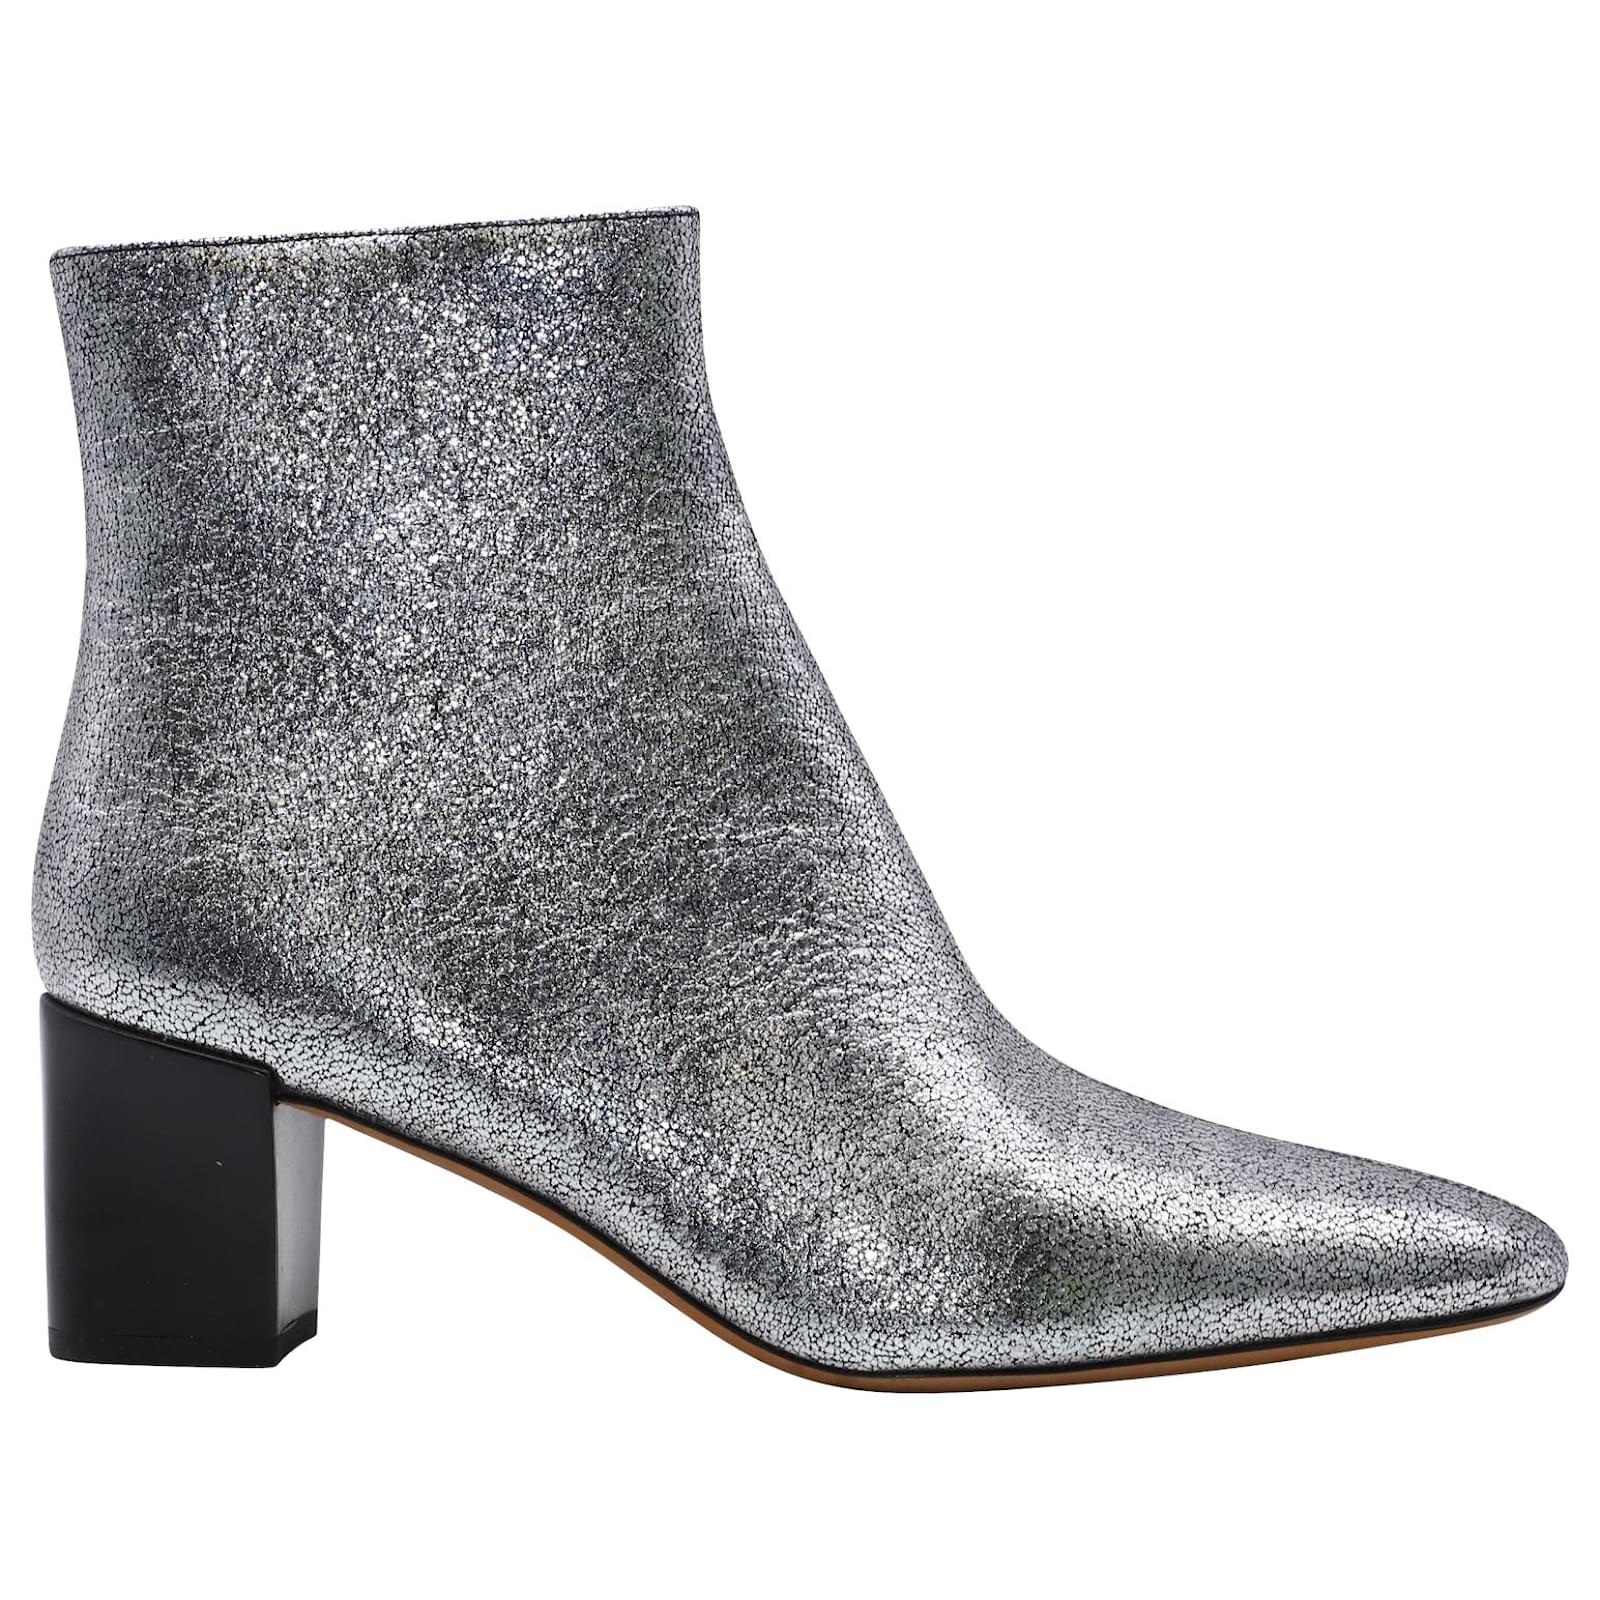 Vince Lanica Metallic Ankle Boots in Silver Leather Silvery ref.553689 ...